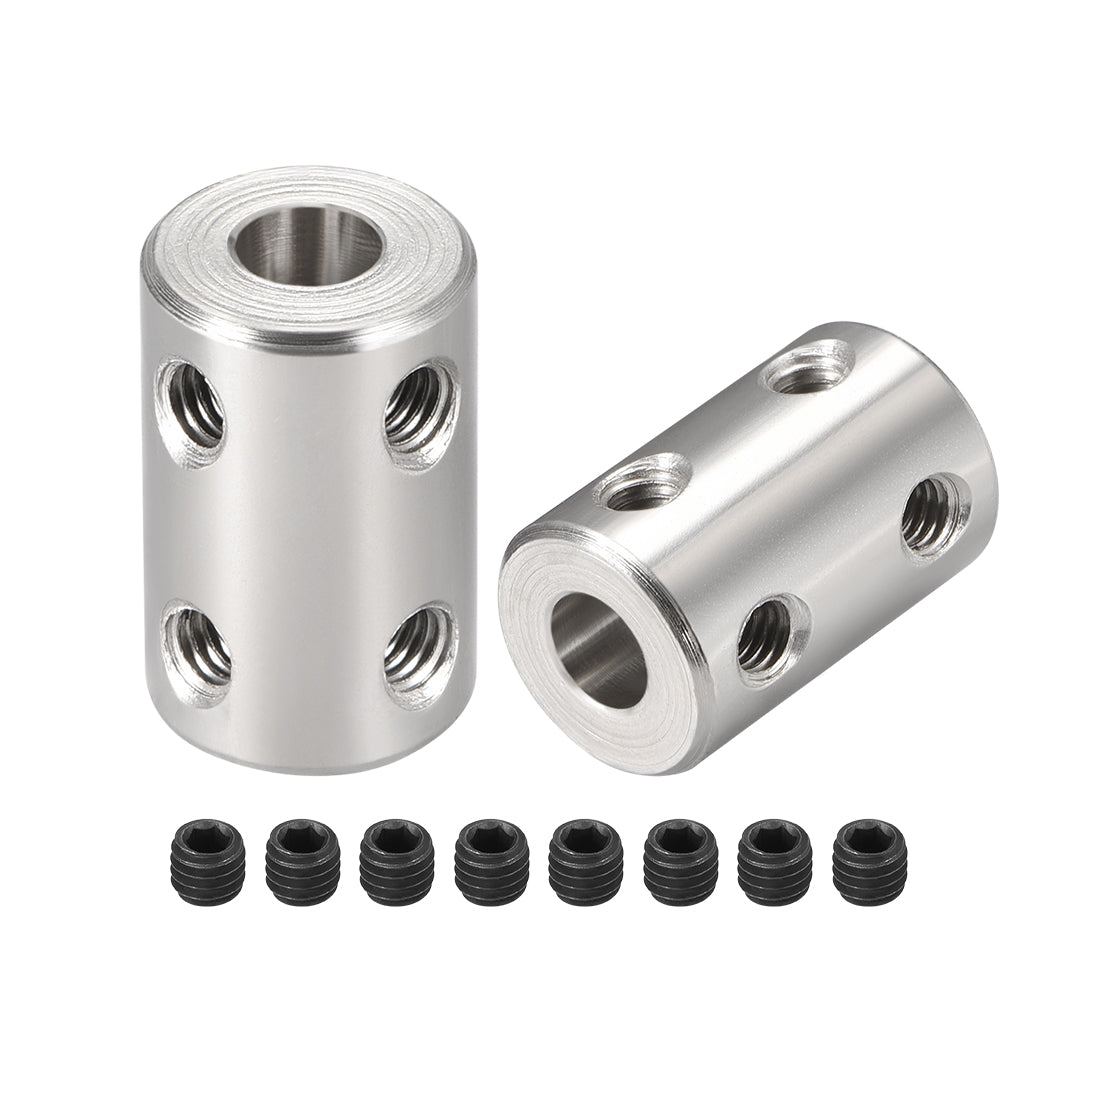 uxcell Uxcell Shaft Coupling 6mm to 6mm Bore L22xD14 Robot Motor Wheel Rigid Coupler Connector Silver Tone 2 Pcs